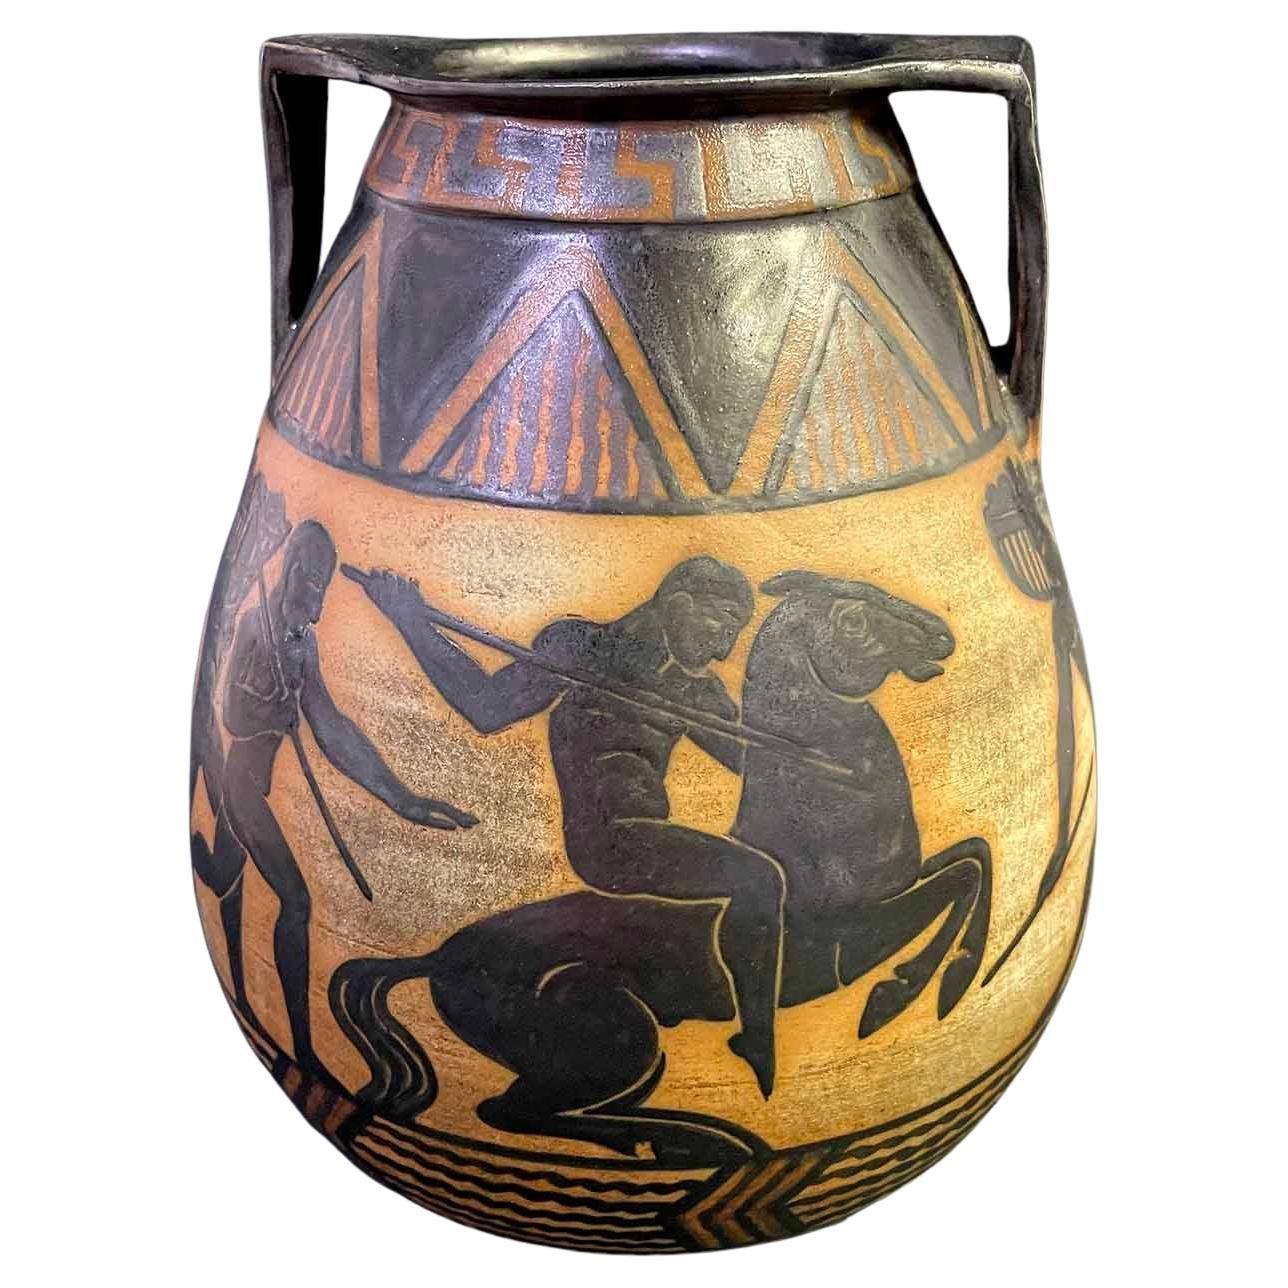 "Frieze of Male Nudes", Art Deco Vase with Greek-Inspired Hunters and Warriors For Sale